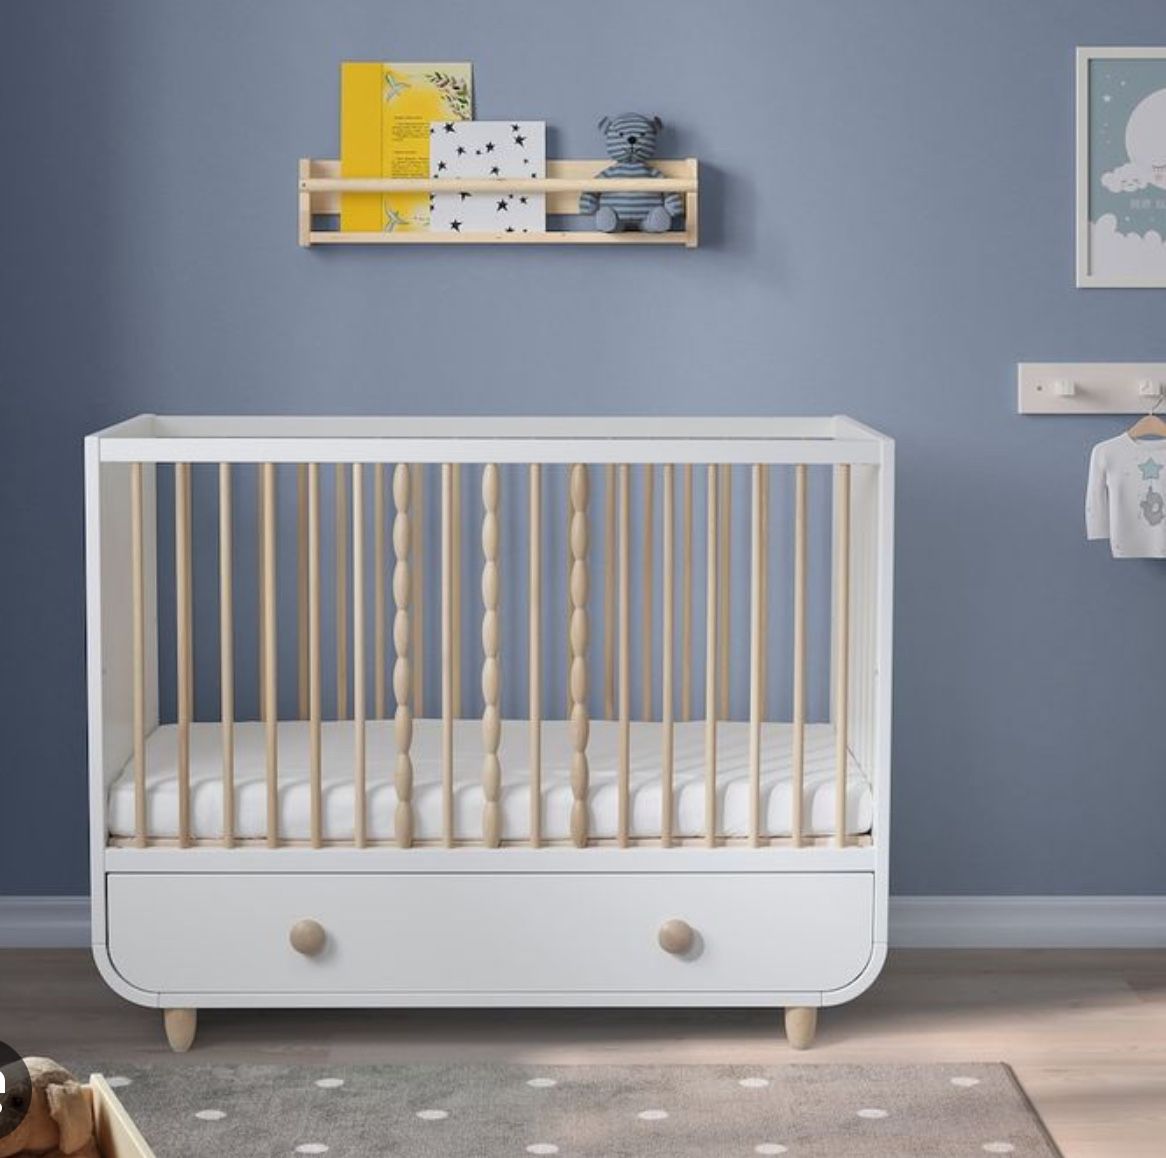  Baby Crib With Drawers